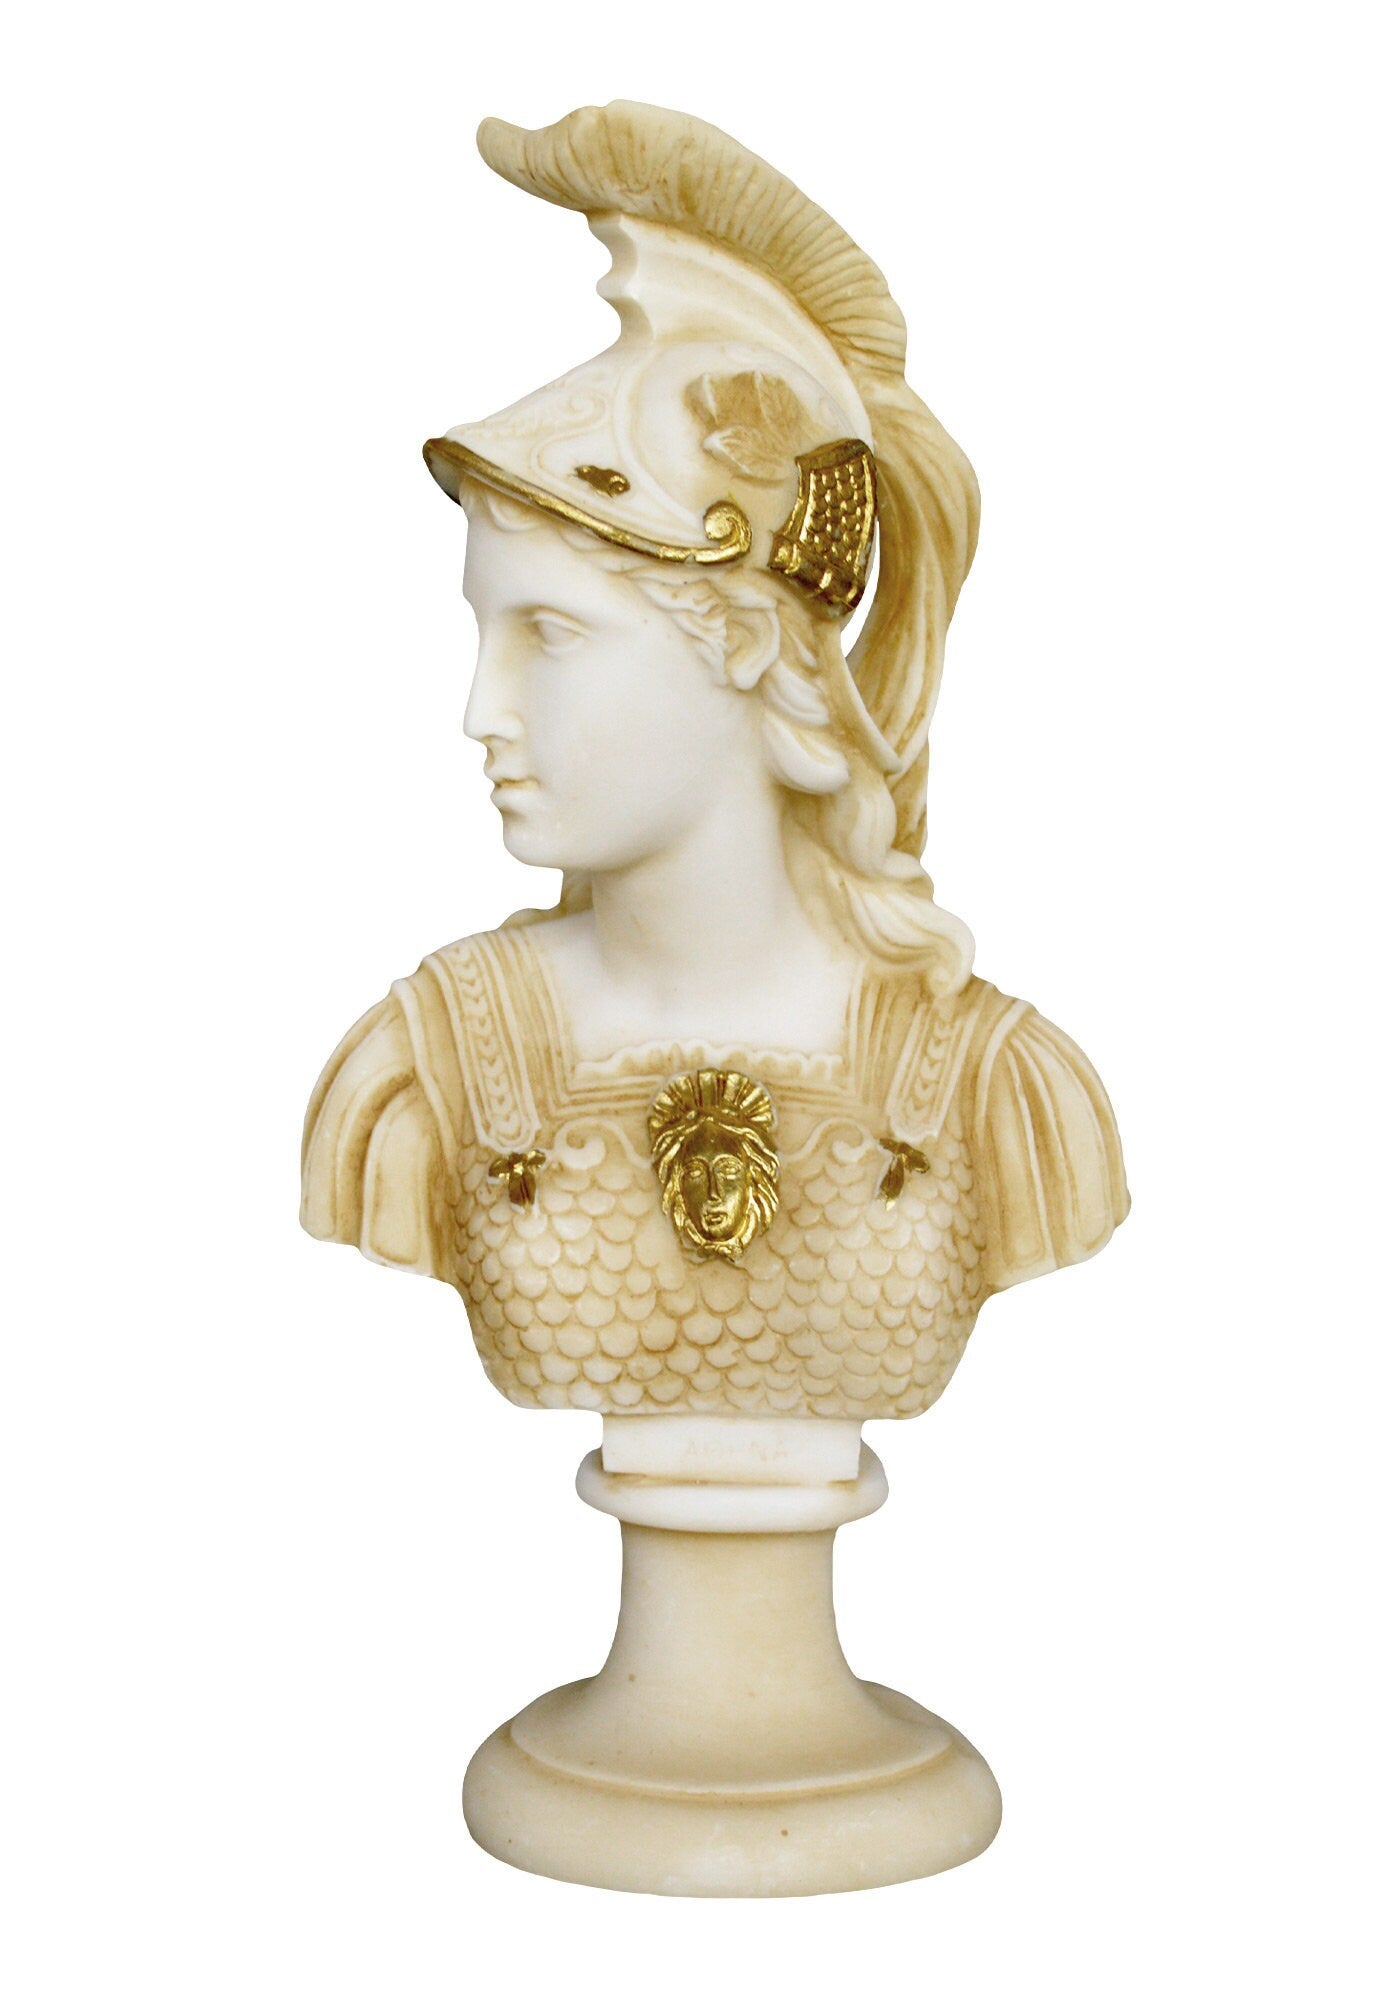 Athena Minerva Bust - Greek Roman Goddes of Wisdom, Strength, Strategy, Courage, Inspiration, Arts, Crafts, and Skill - Aged Alabaster